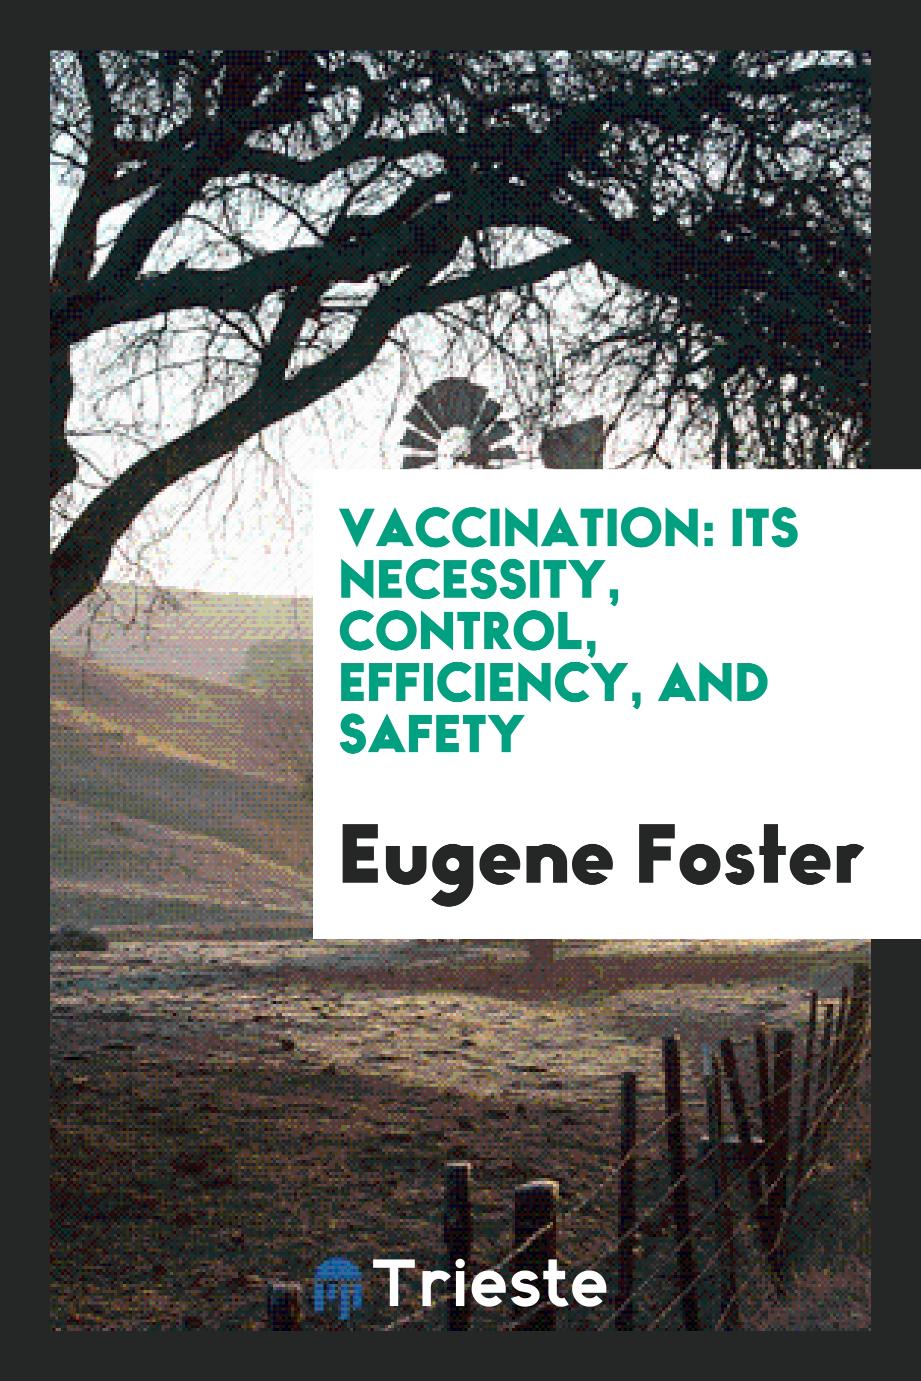 Vaccination: its necessity, control, efficiency, and safety